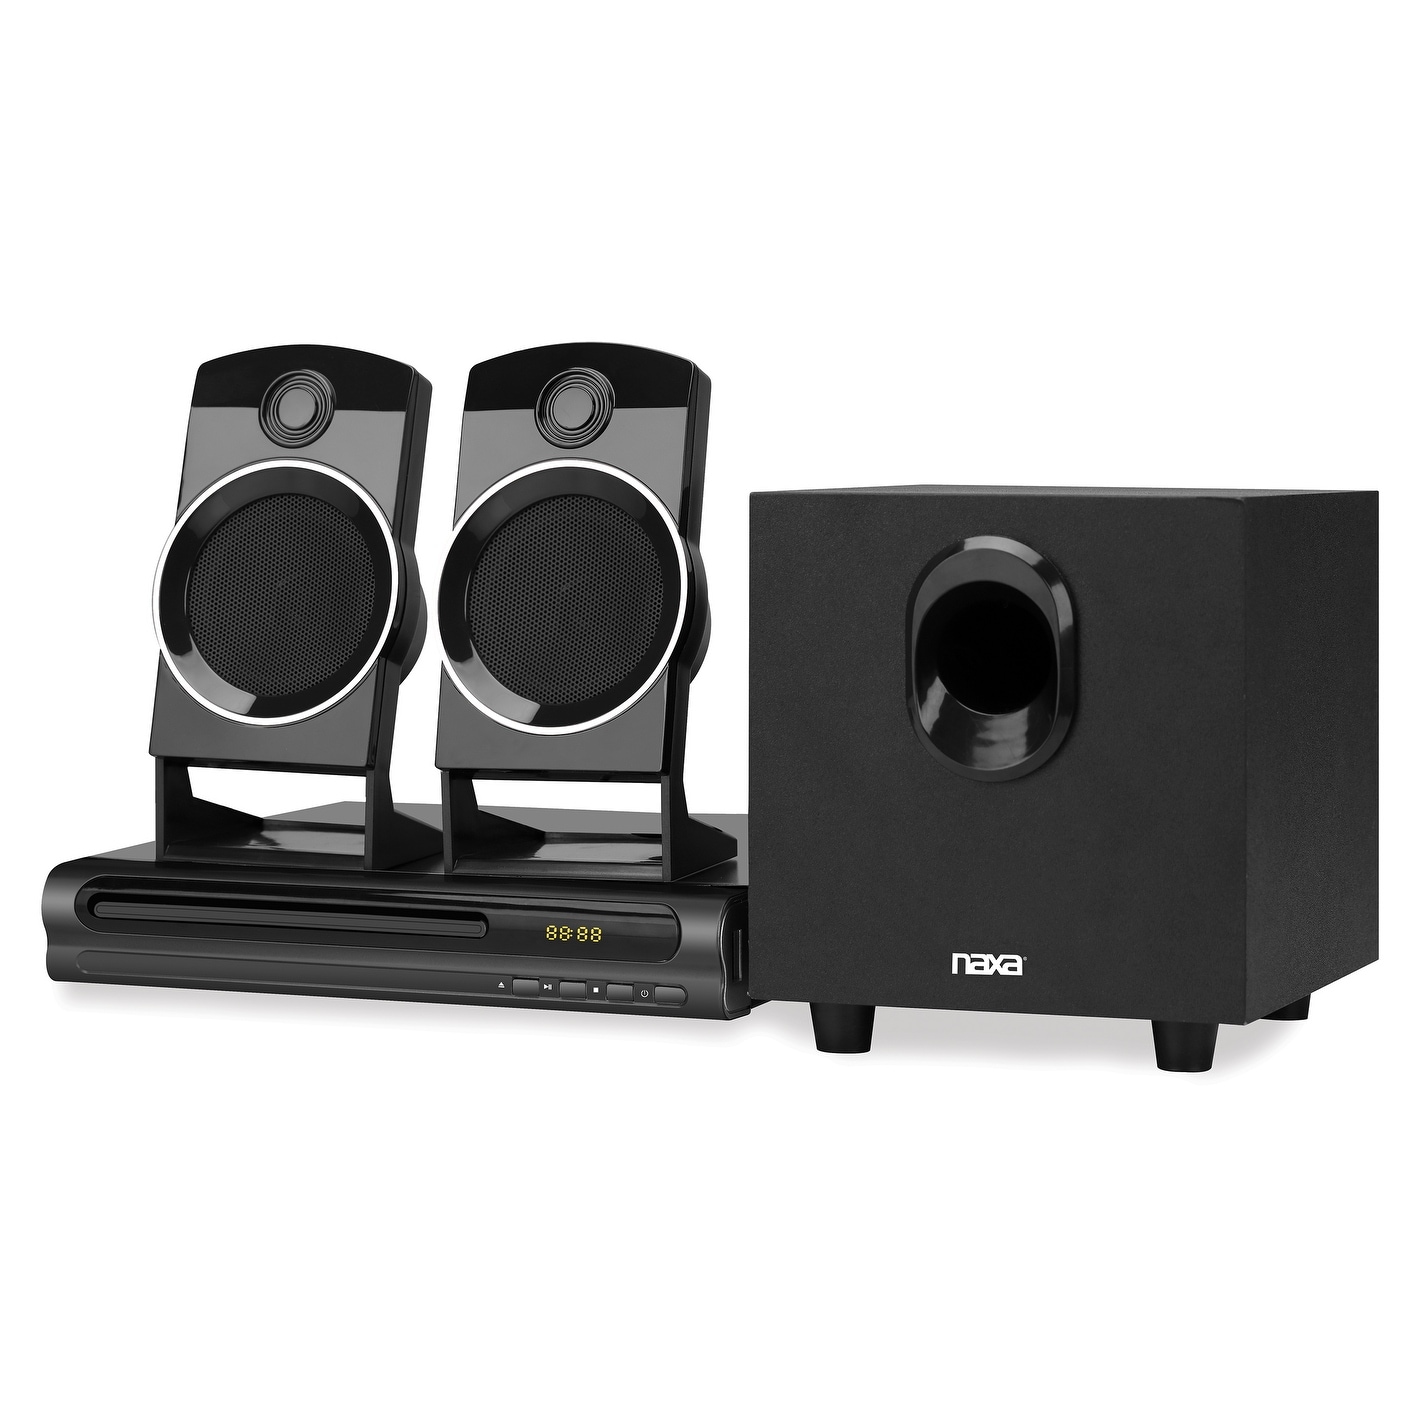 Home Theater in a Box (DVD Digital Player & 2.1 Channel Speaker System) (ND-863)